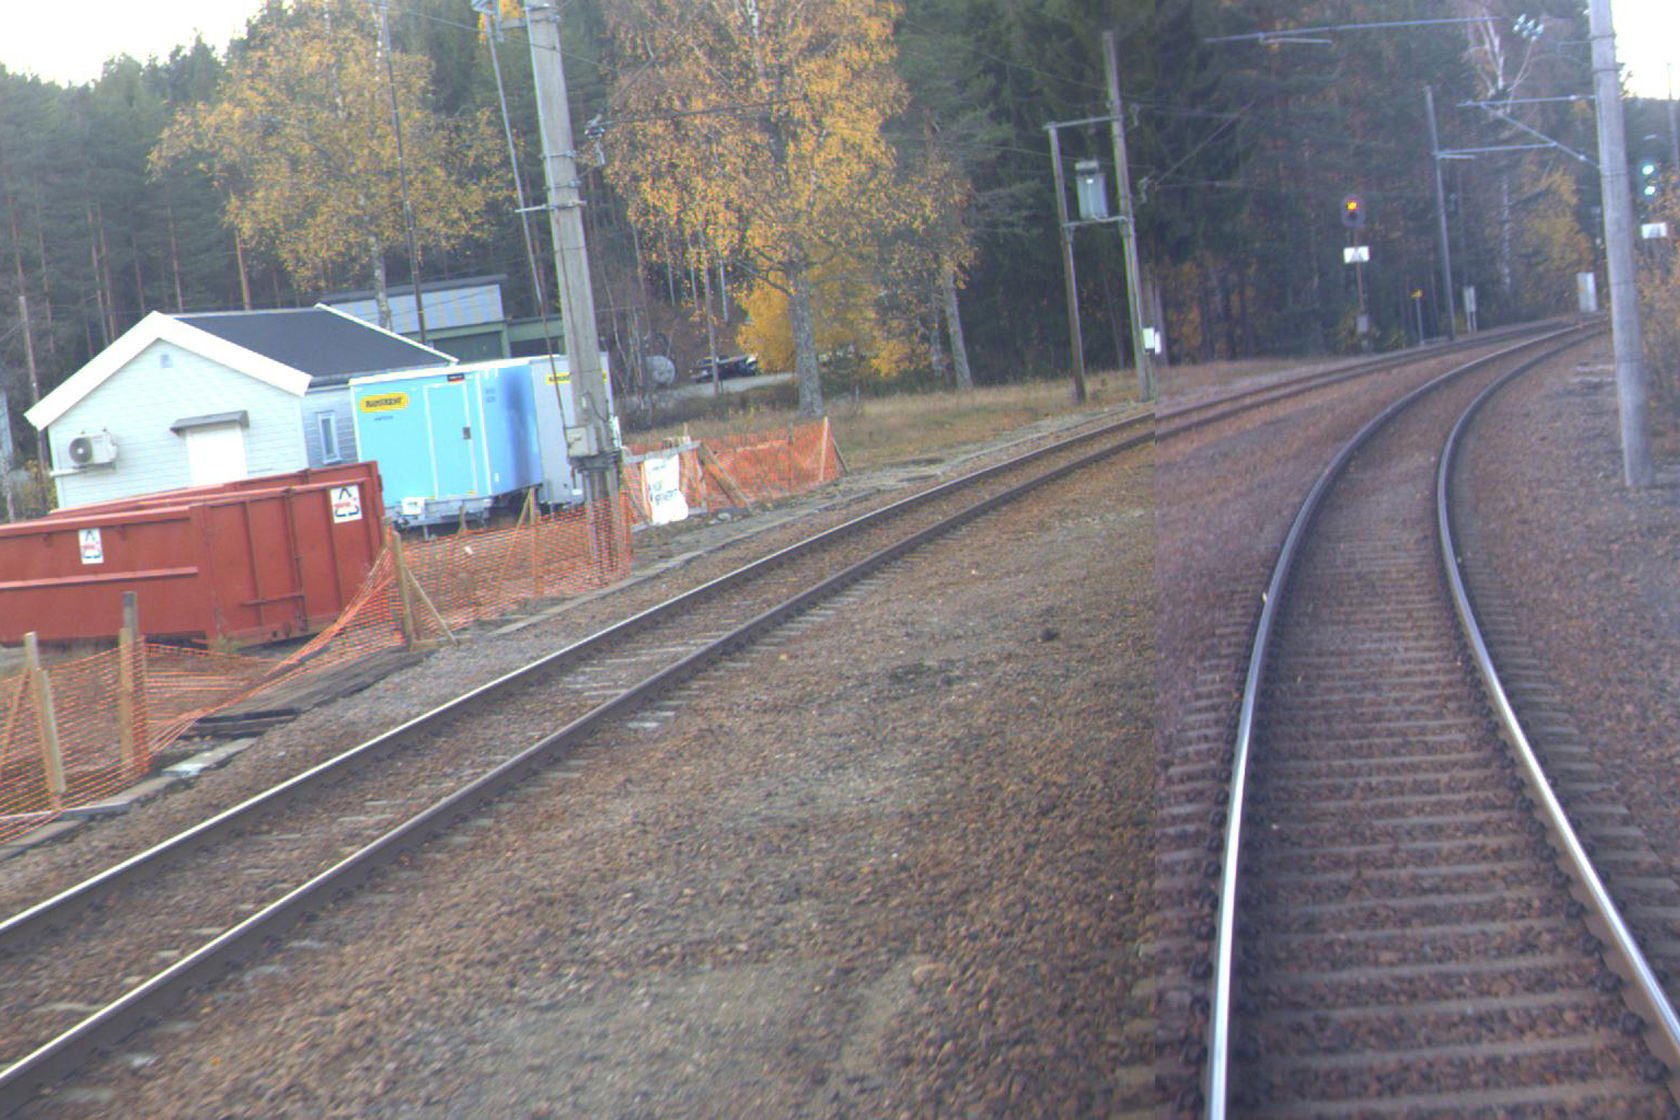 Tracks and building at Helldalsmo station